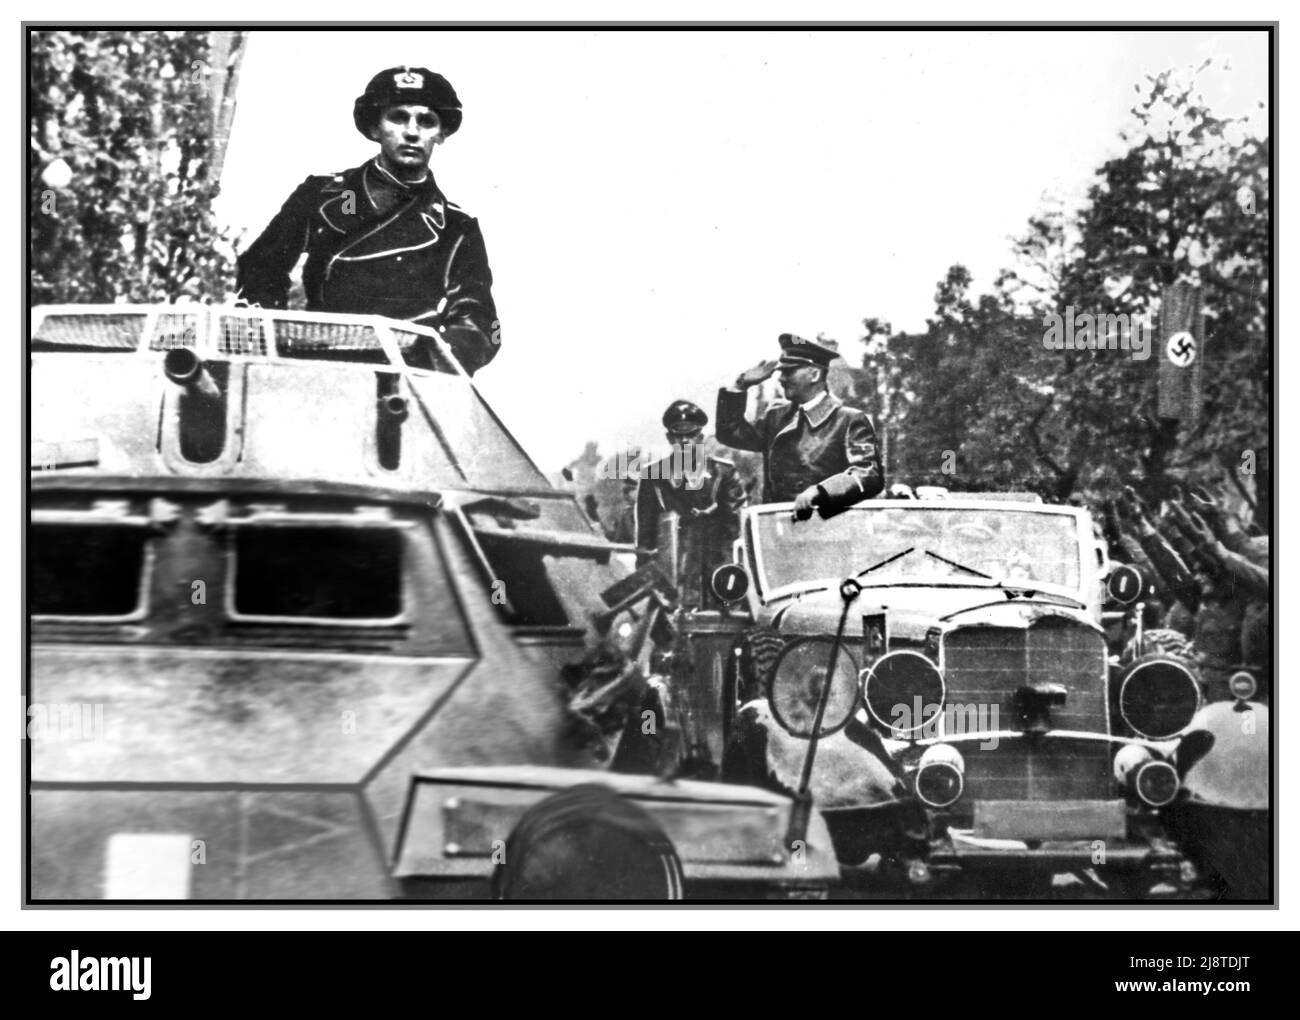 WW2 POLAND Adolf Hitler greets and salutes the Heil Hitler saluting soldiers from his half track Mercedes car. In the foreground, the SdKfz 222 armoured vehicle. Leichter Panzerspähwagen, with panzertruppen soldier standing. The Occupation of  Gdańsk Poland that started World War II 1939 Stock Photo